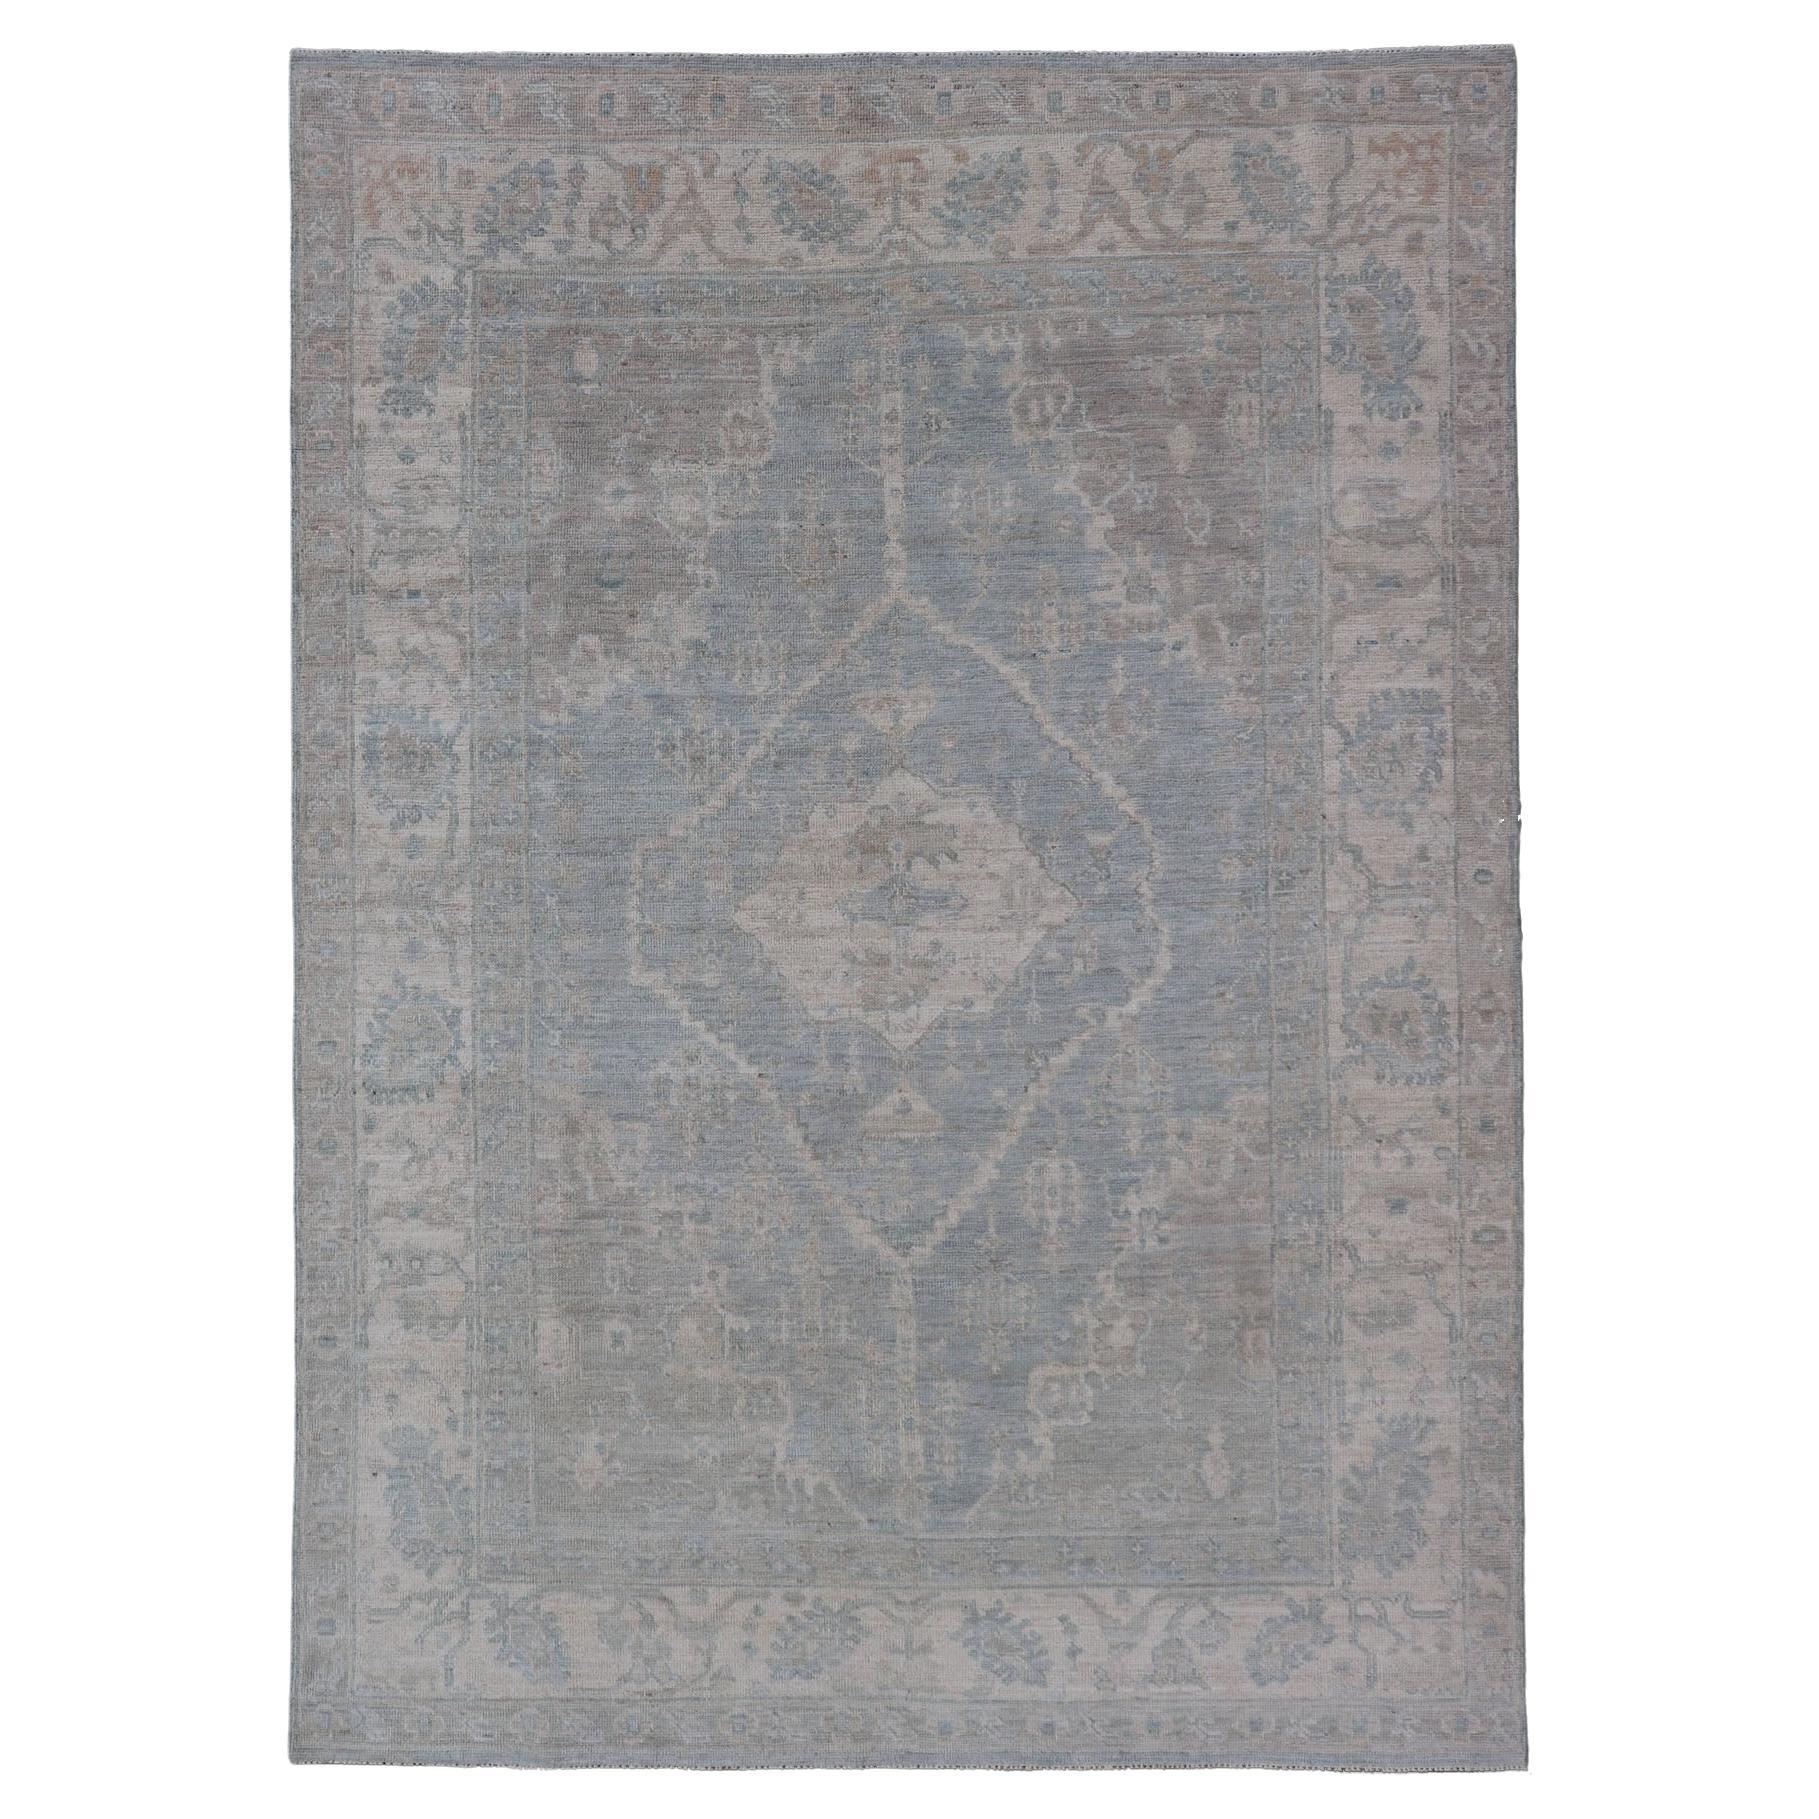 Modern Oushak with a Light Blue-Gray Background with Medallion & Tribal Motifs